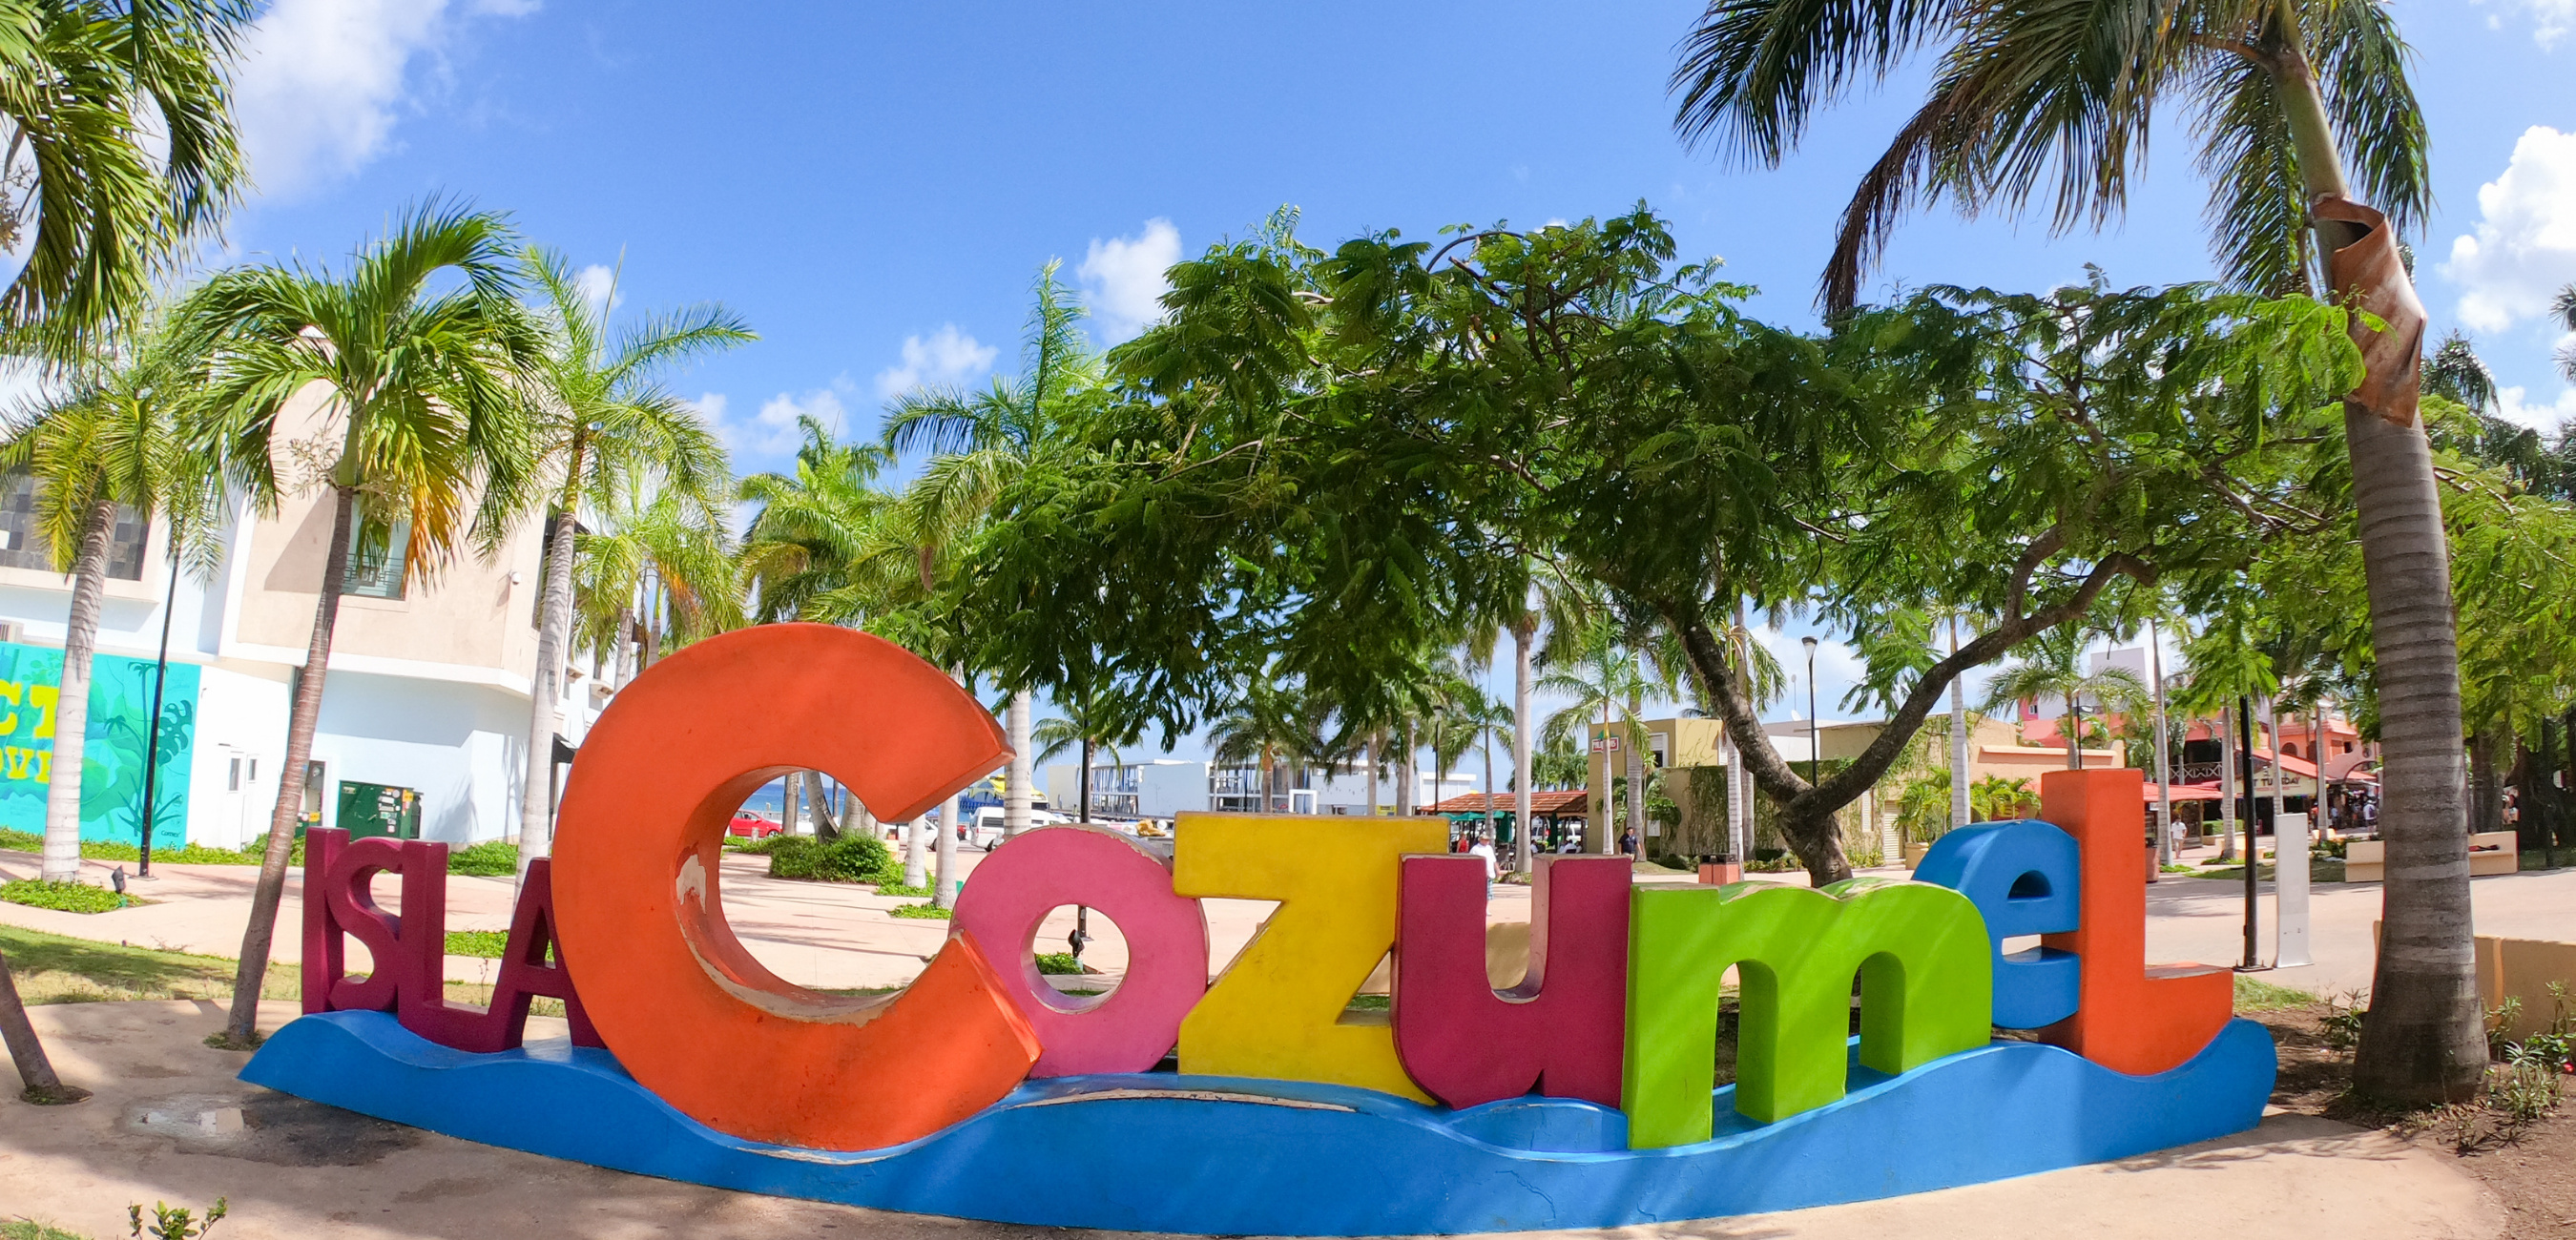 Cozumel attractions, Top sights, Beautiful beaches, Mexican paradise, 2700x1300 Dual Screen Desktop